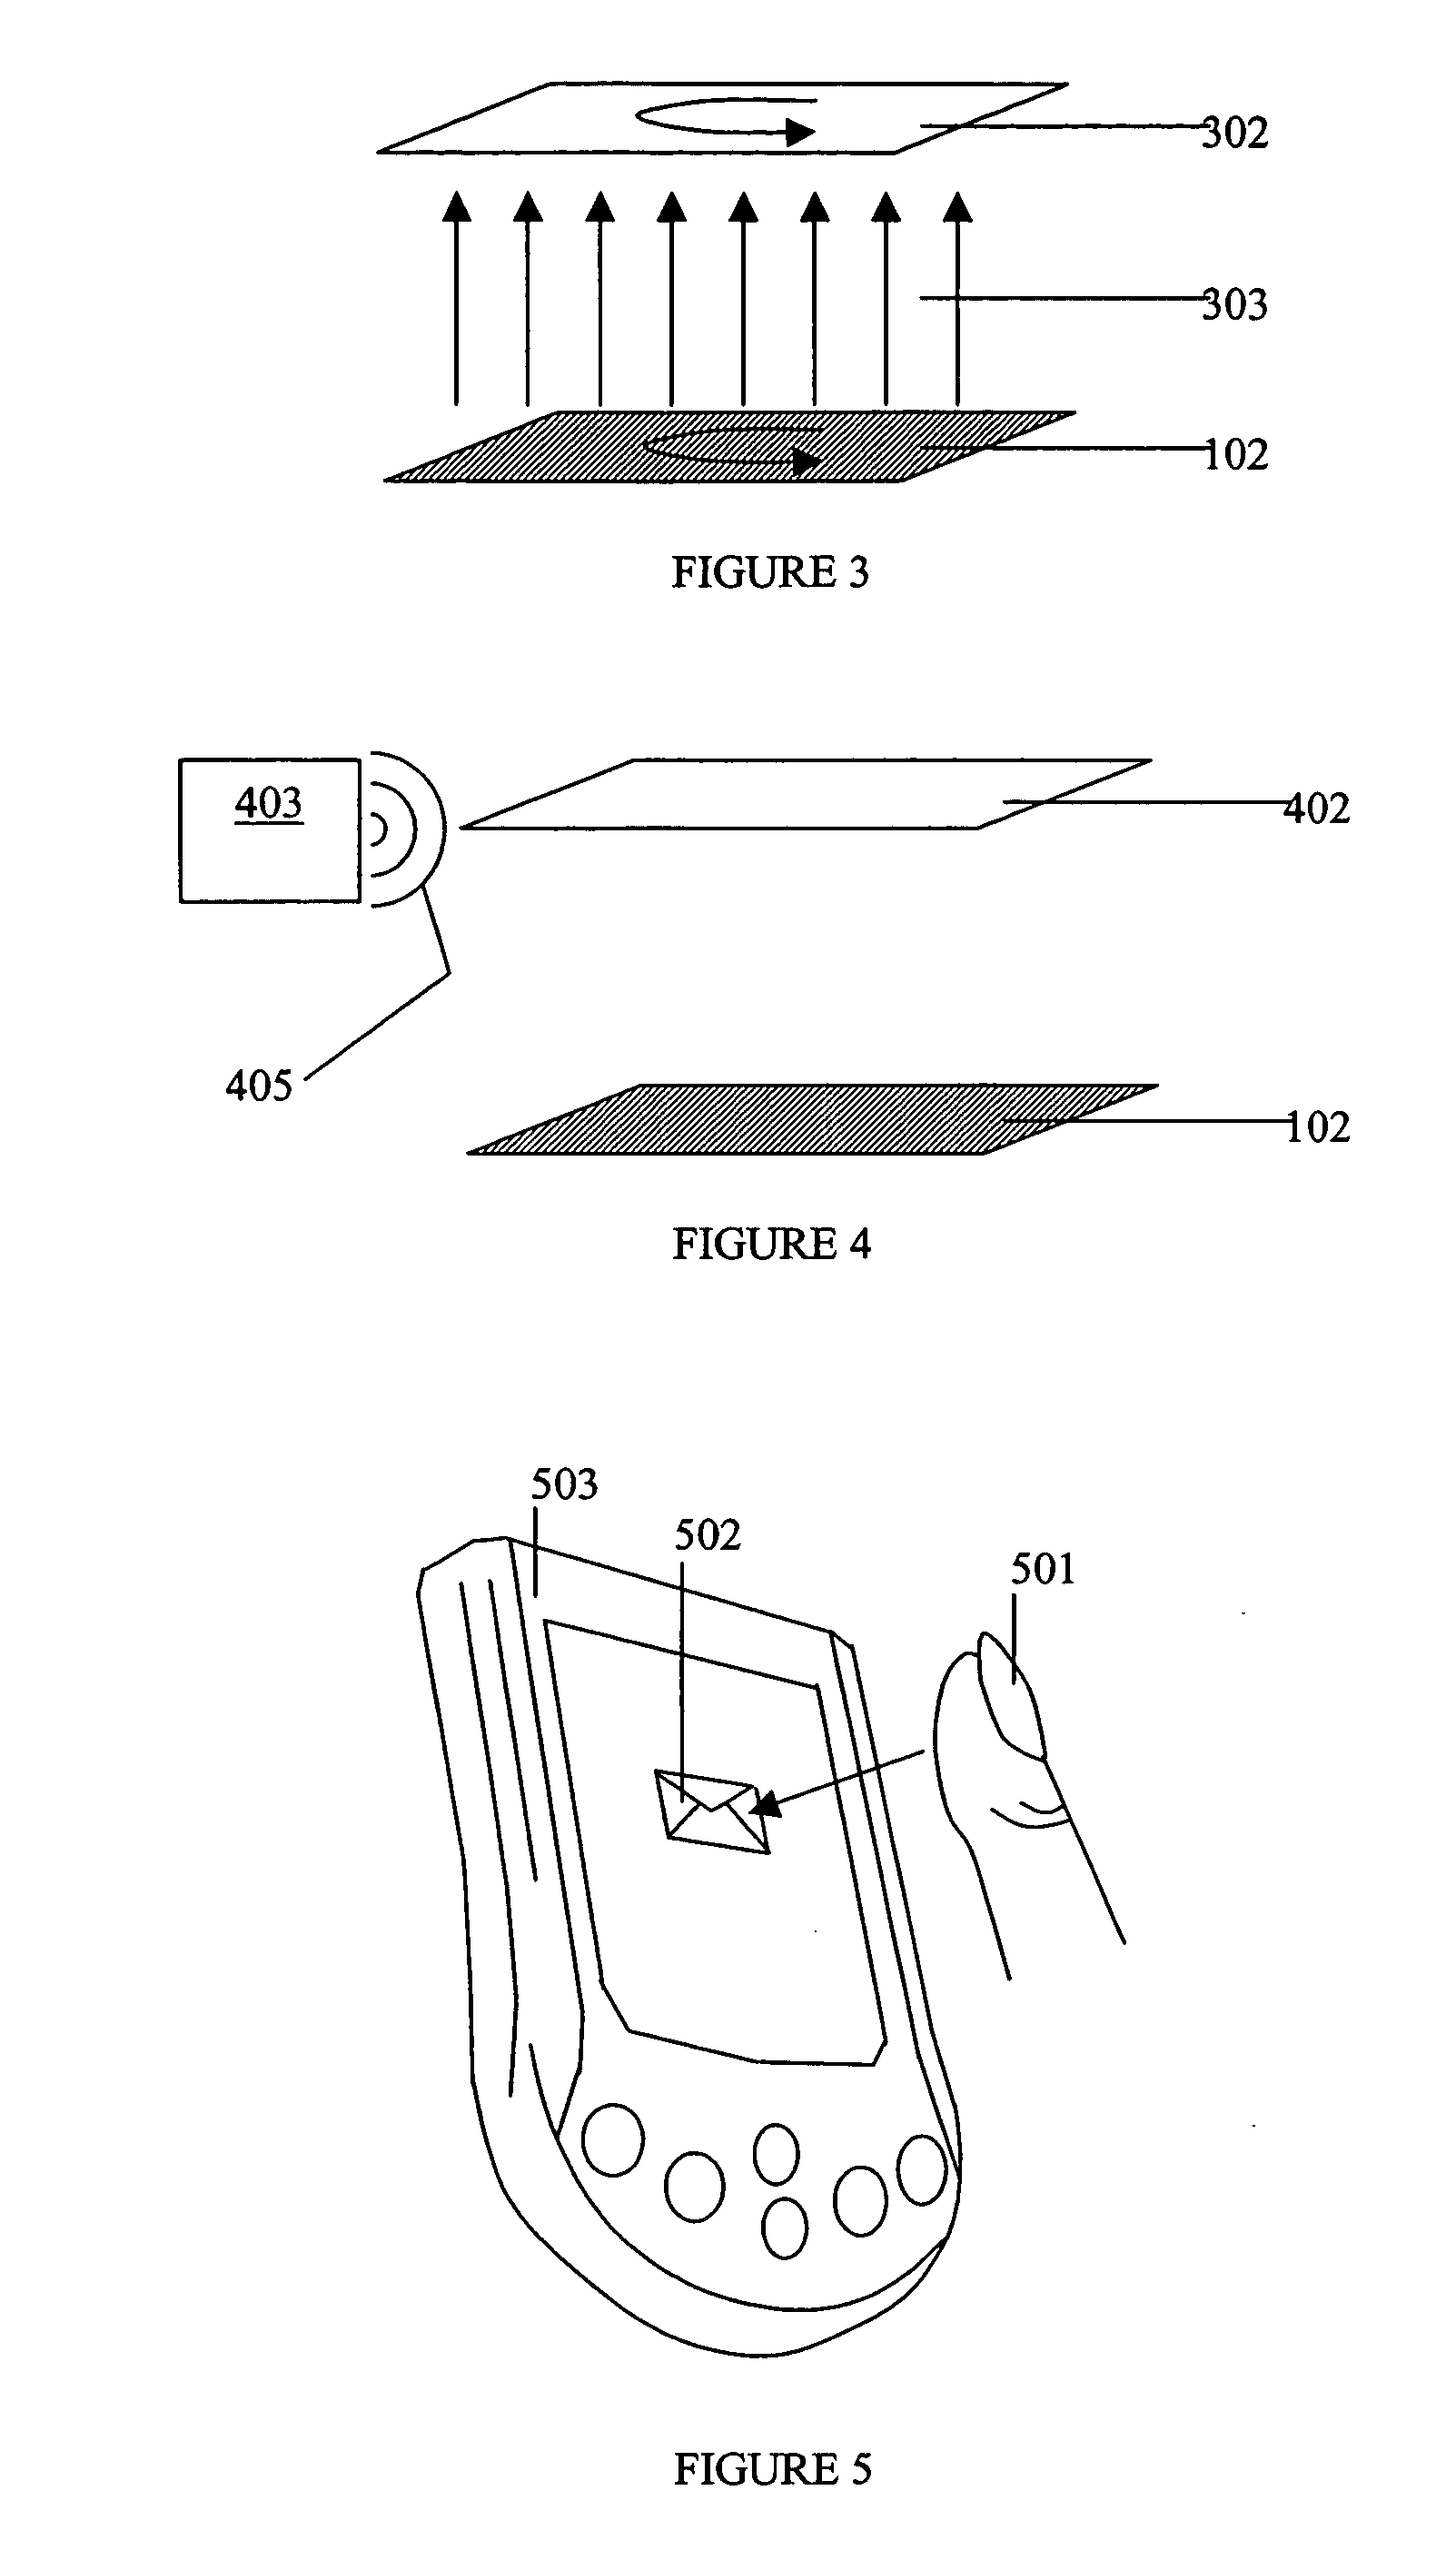 Man-machine interface for controlling access to electronic devices